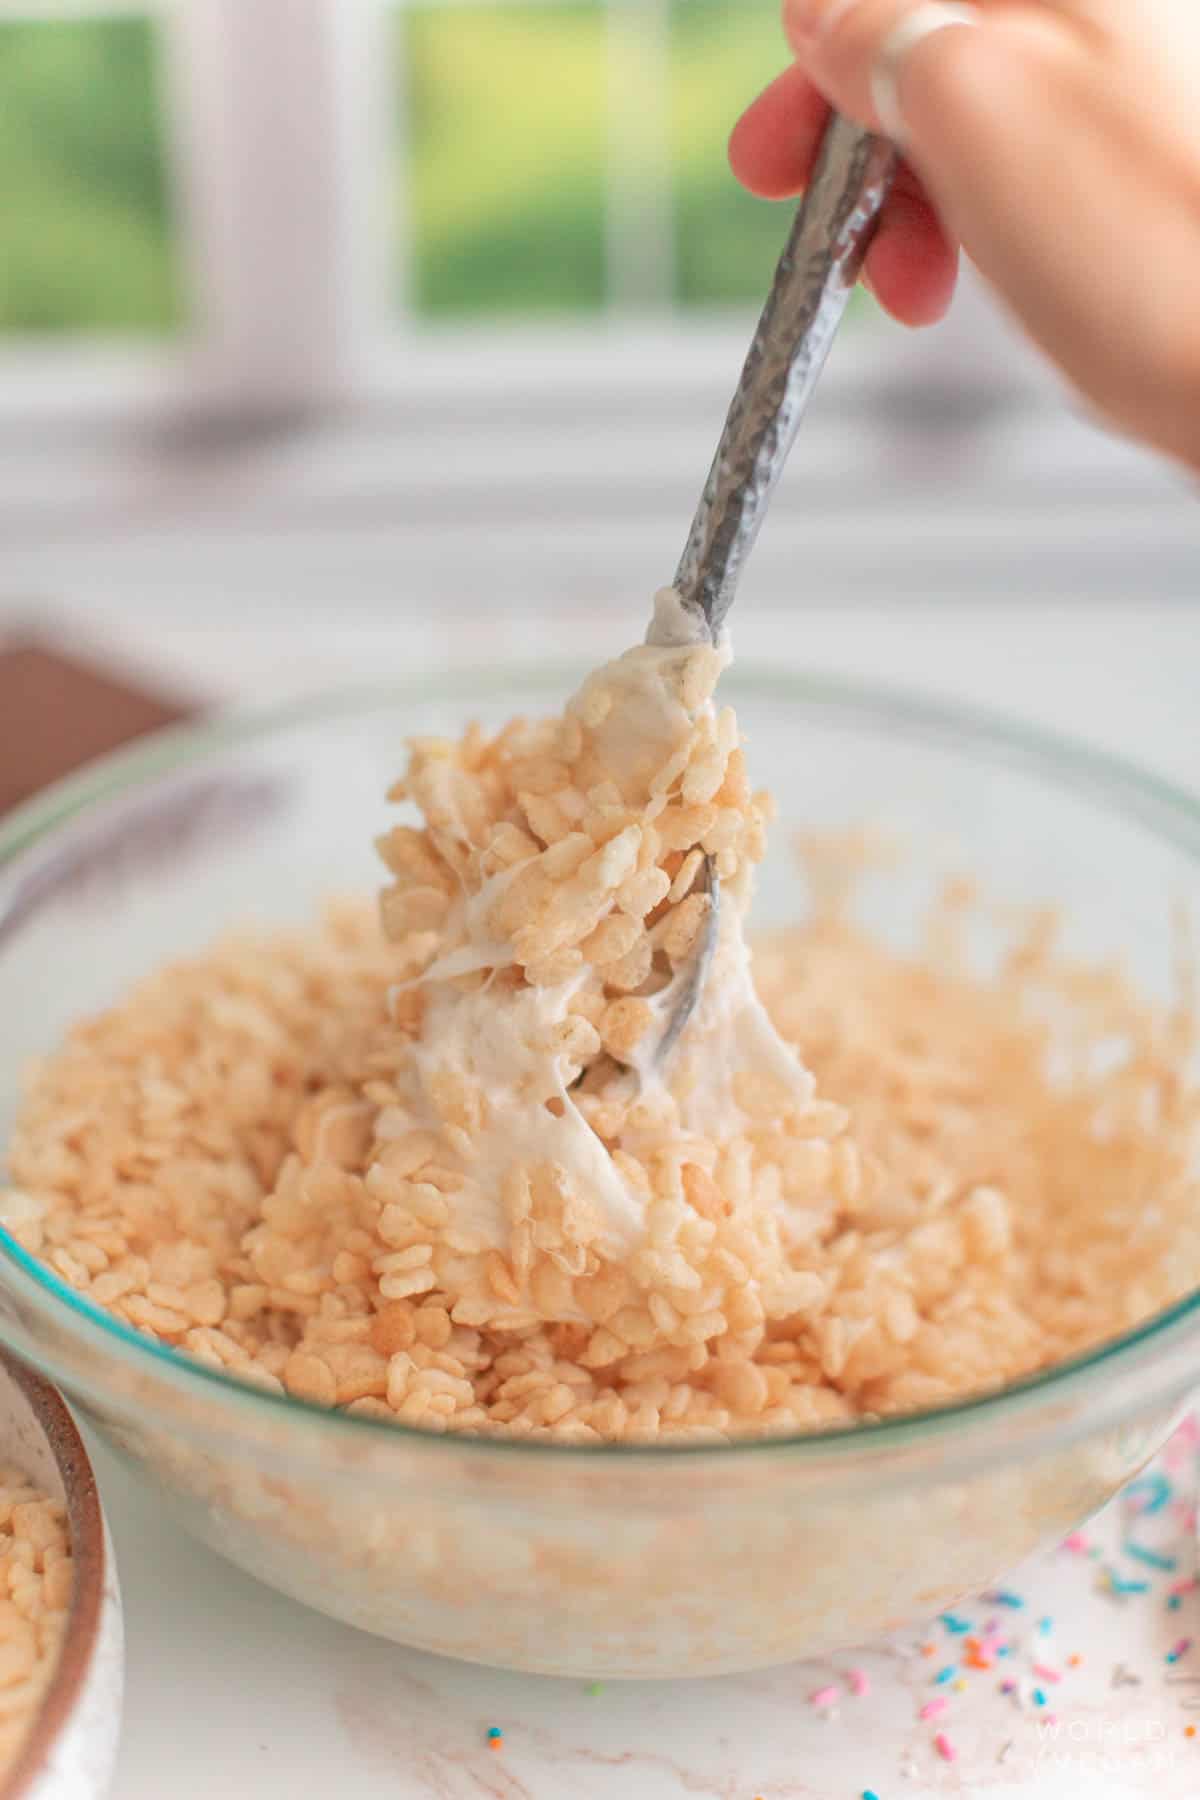 mix rice krispies cereal with melted marshmallows